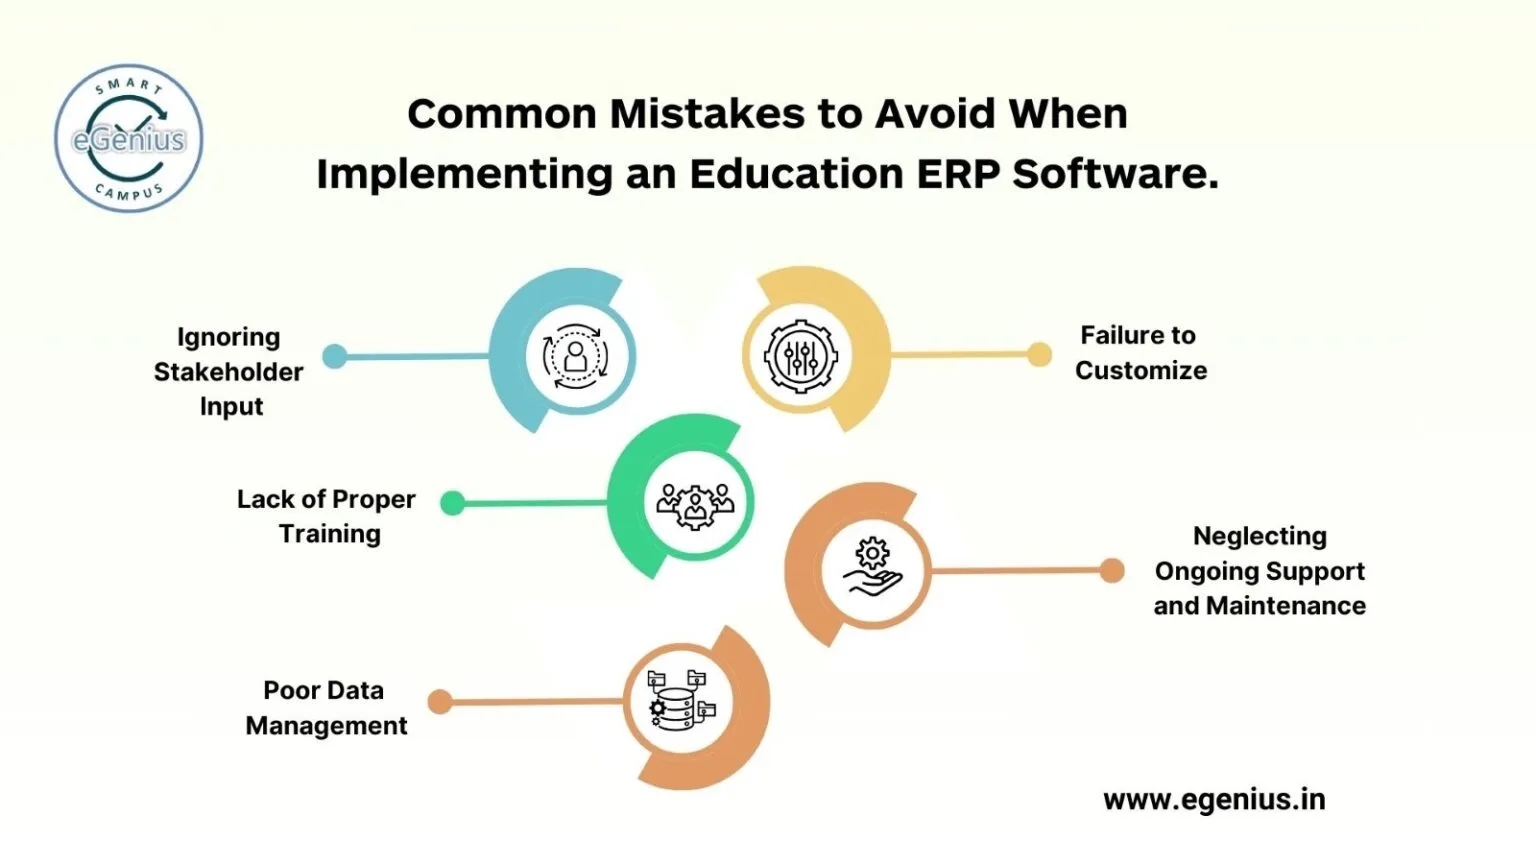 Top 5 Mistakes to Avoid When Implementing an Education ERP Software